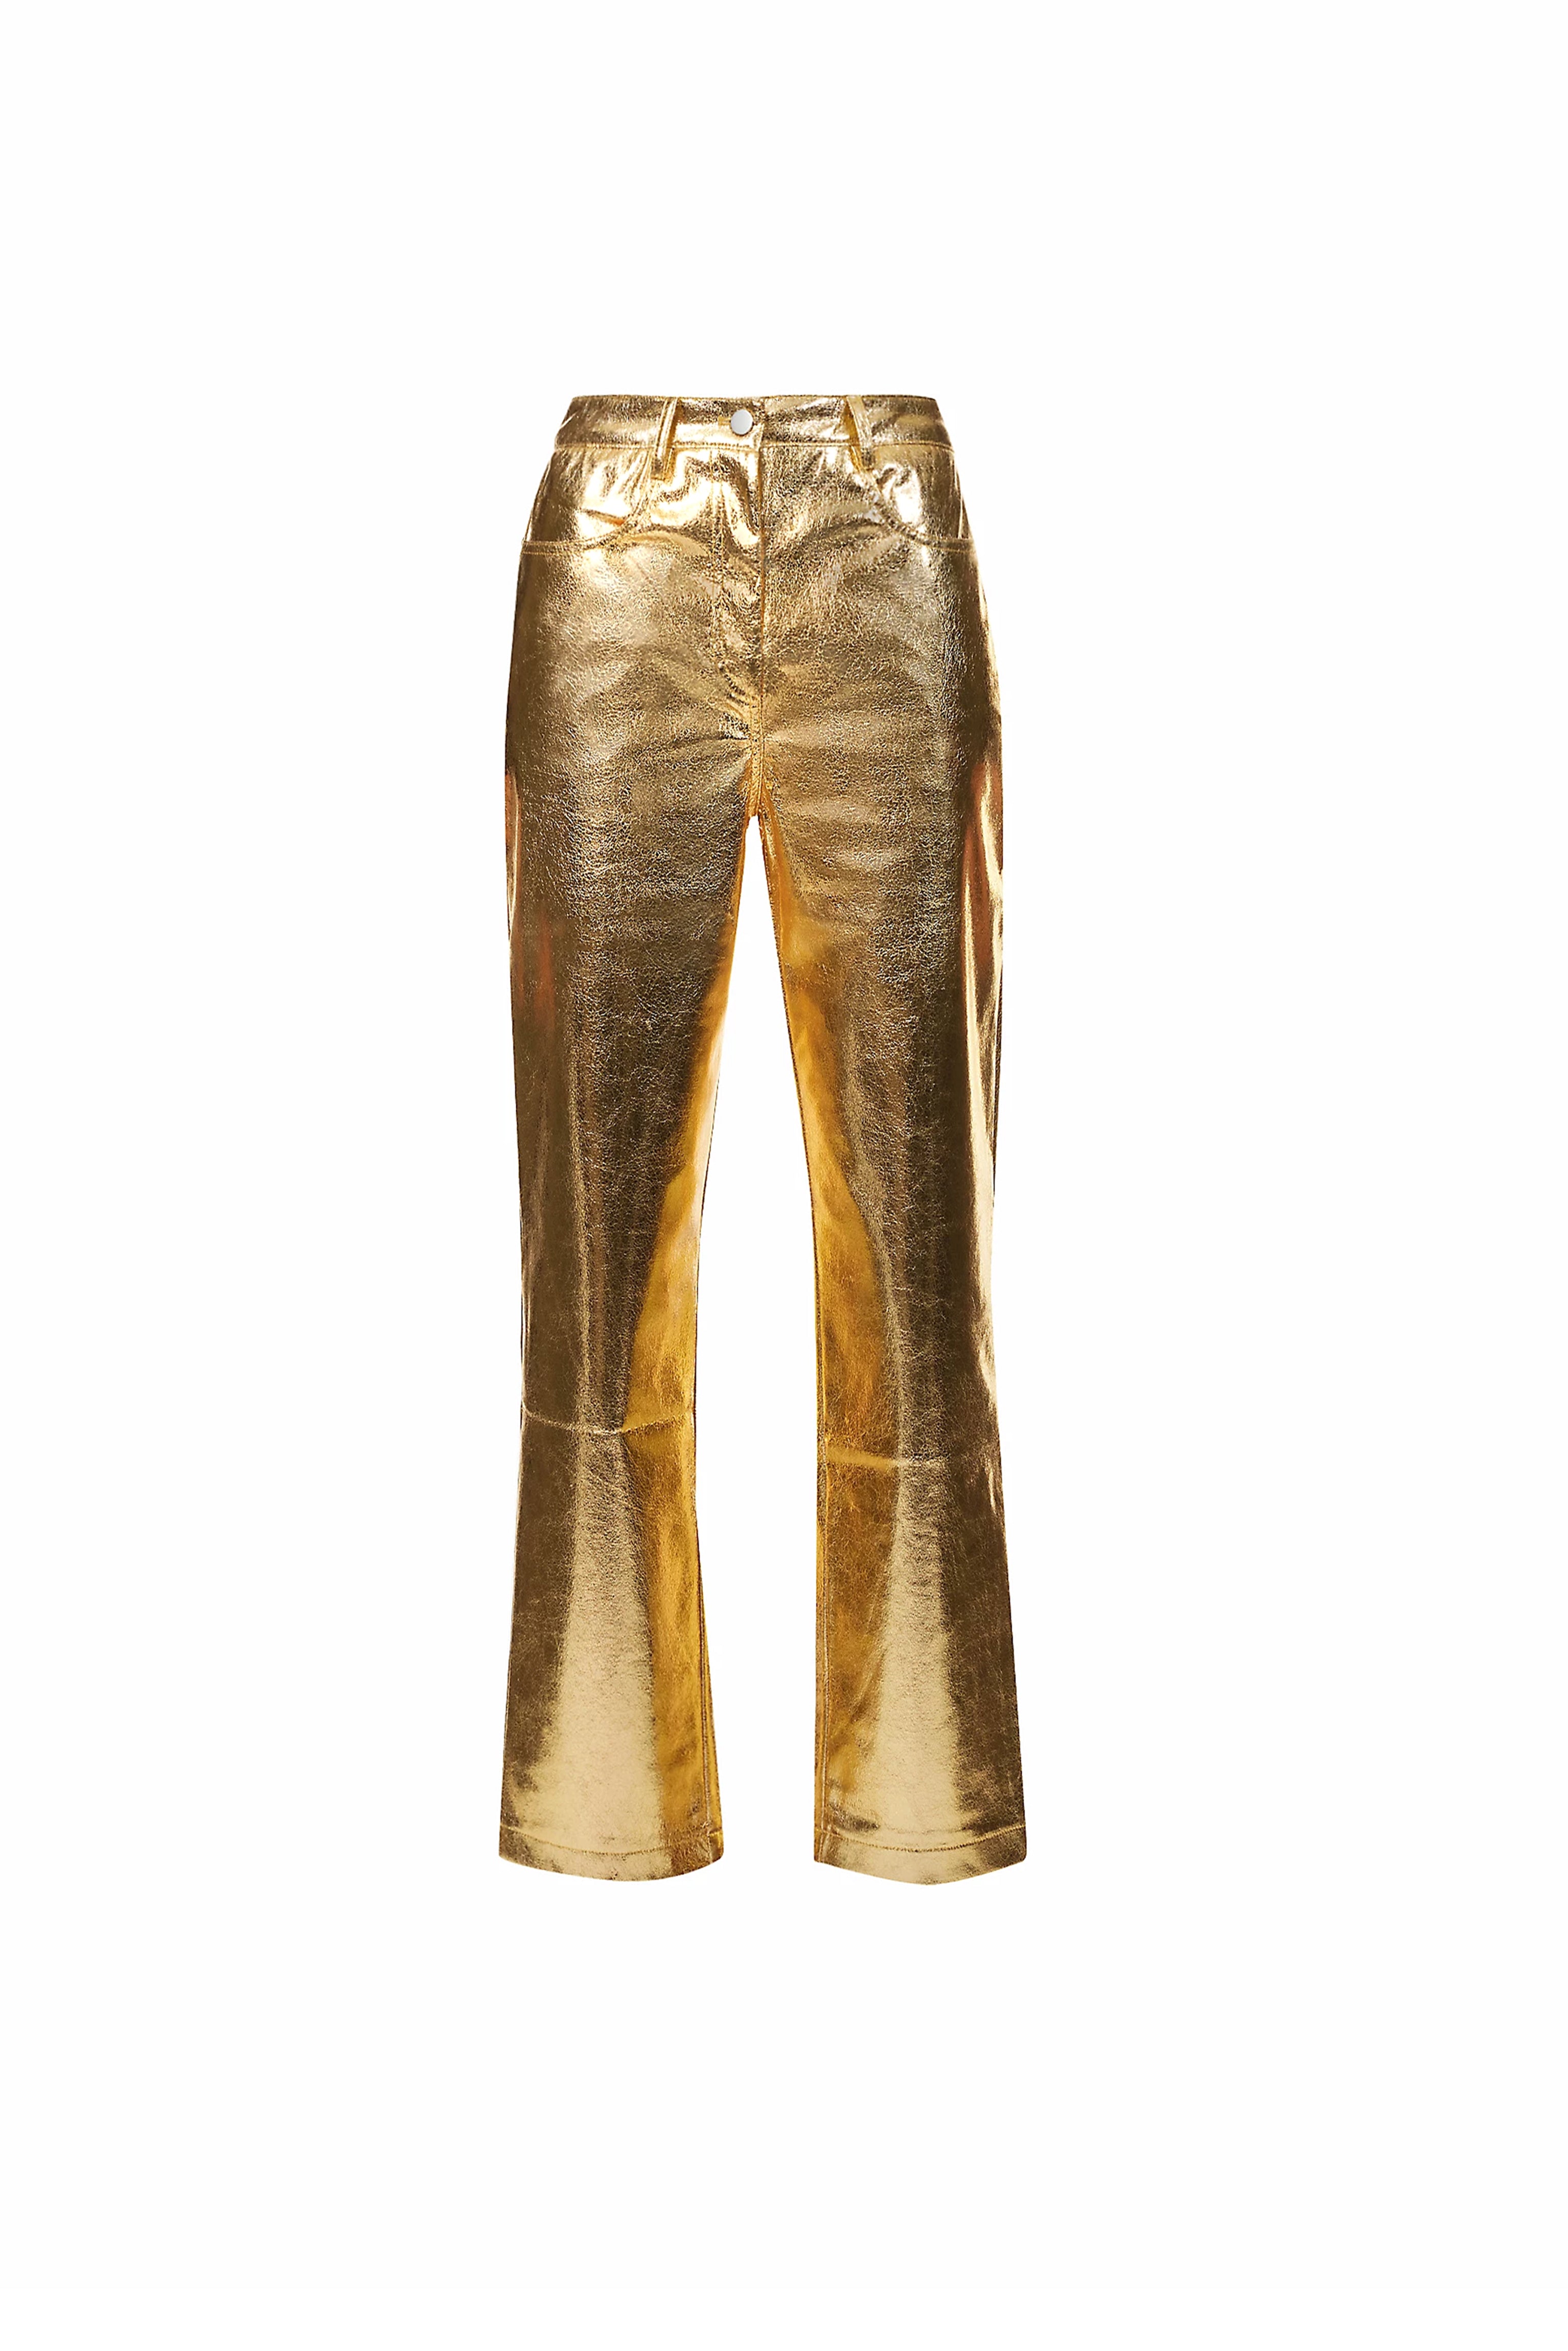 Lupe Gold Textured Metallic Trousers